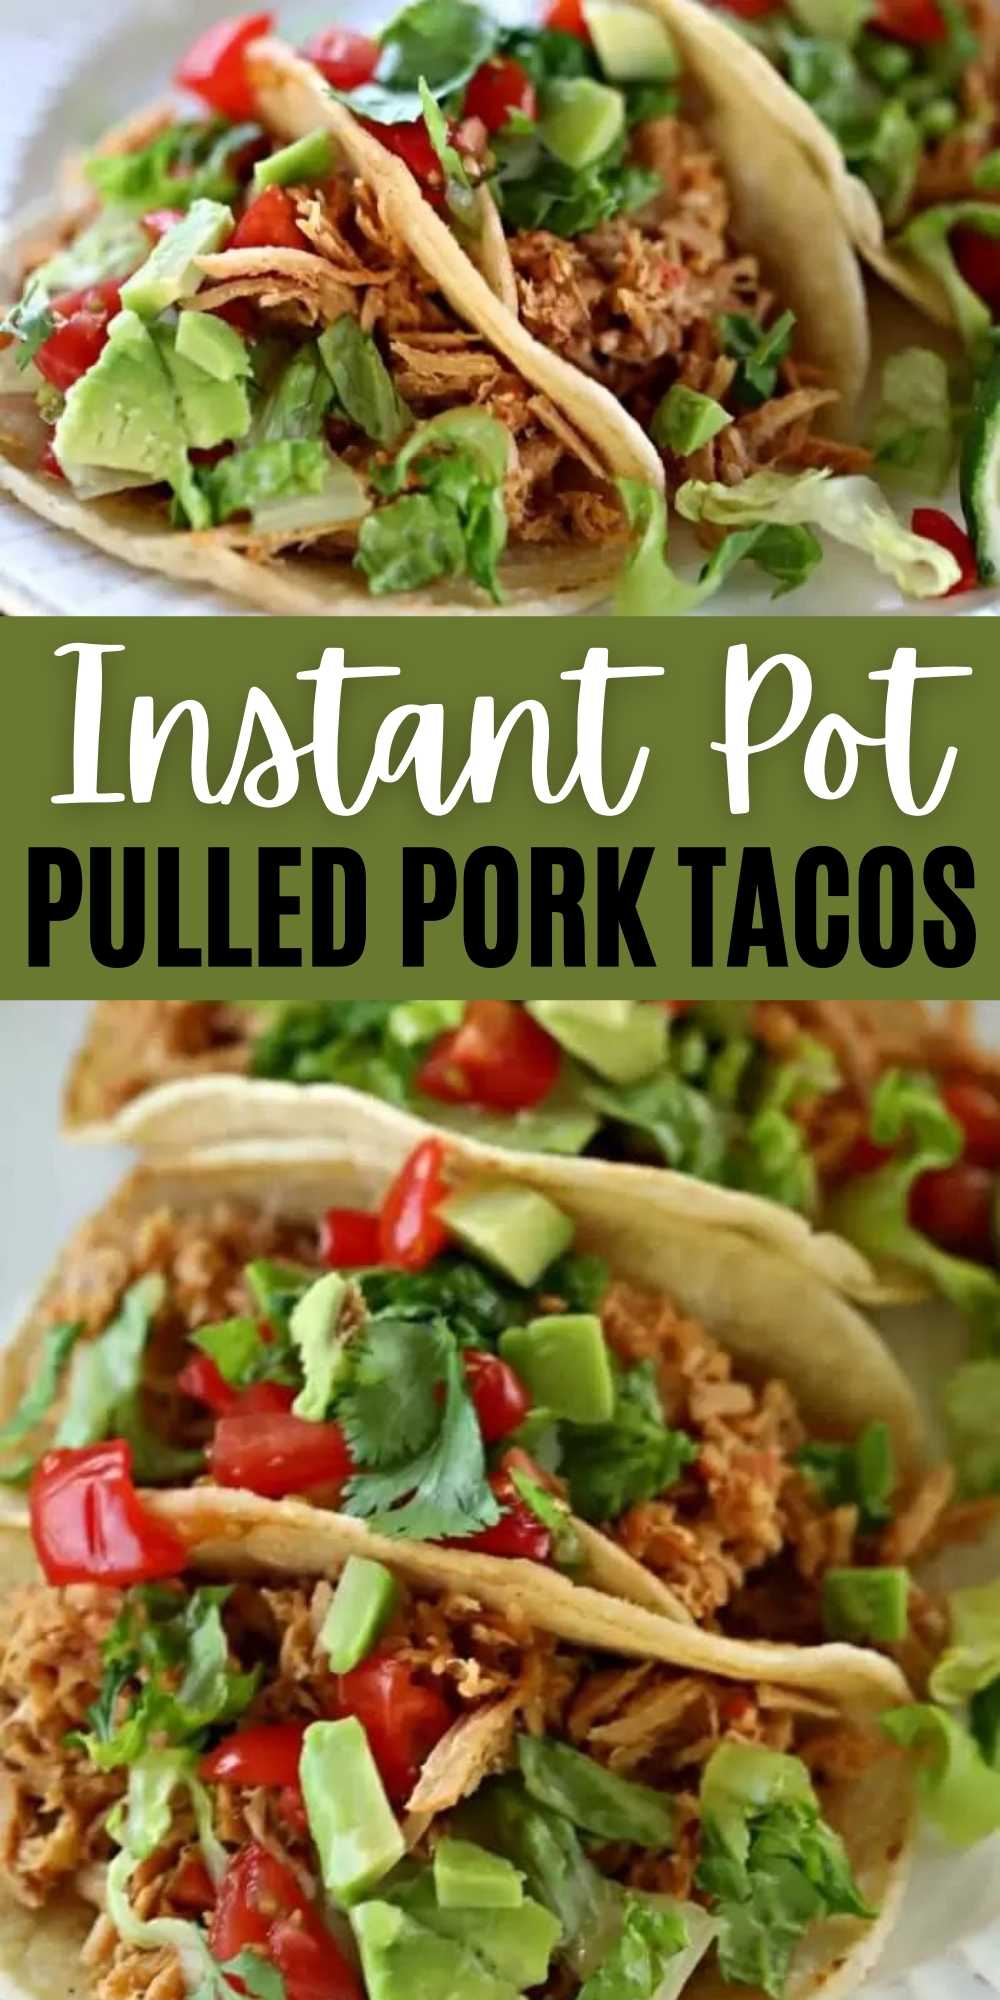 You only need 4 ingredients to make Instant pot pulled pork tacos recipe. Everyone will enjoy these Mexican pulled pork tacos. Try Pressure Cooker shredded pork tacos that are easy to make too! #eatingonadime #instantpotrecipes #tacorecipes #pressurecookerrecipes 
